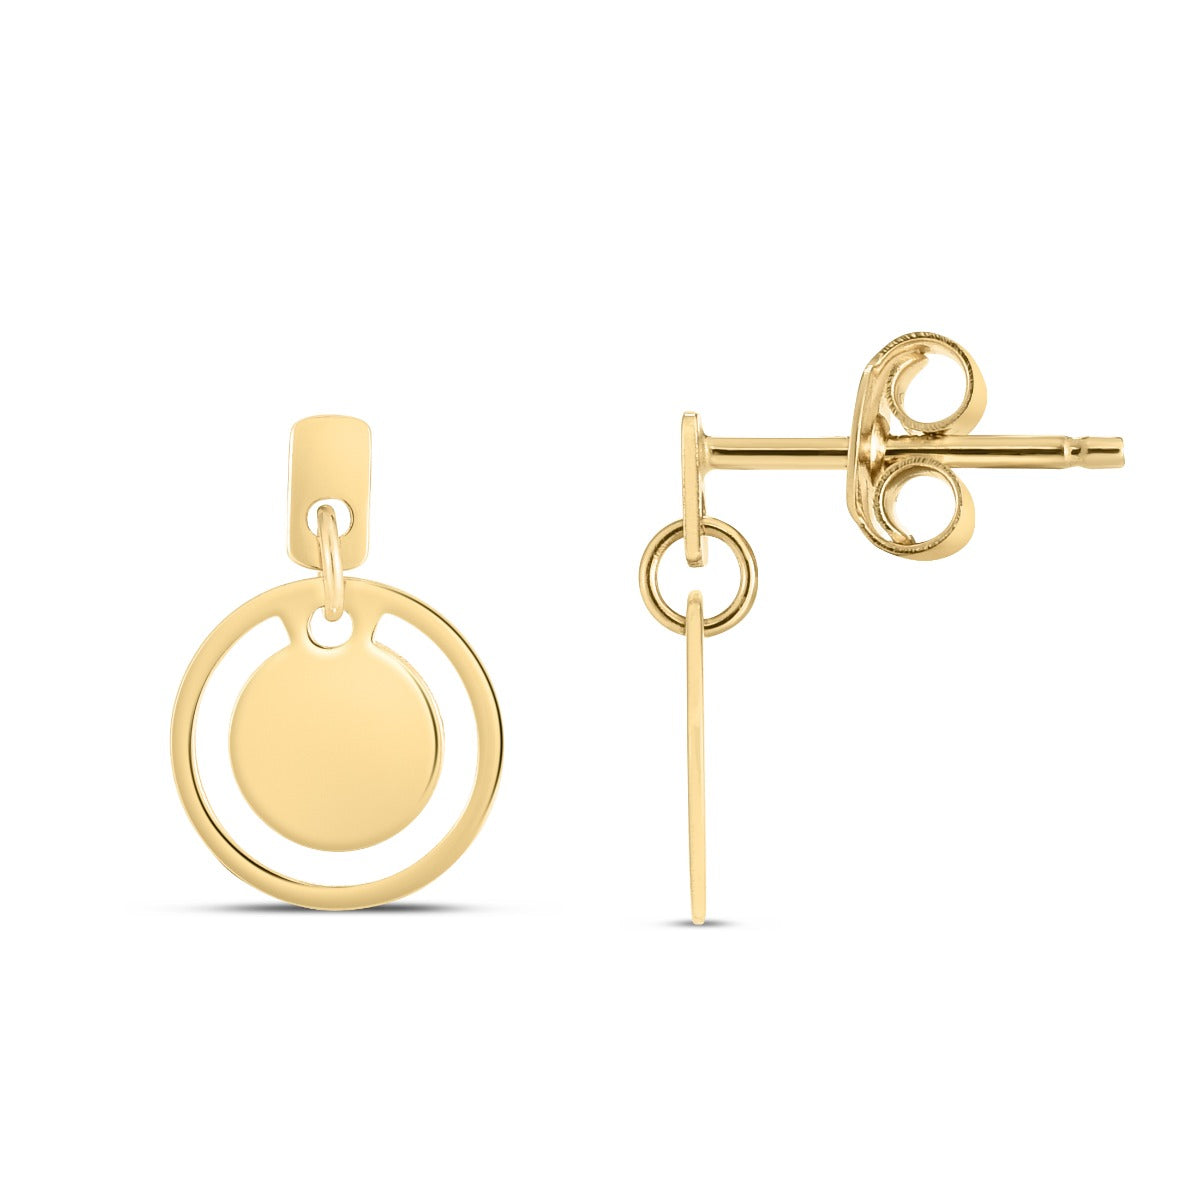 14K Gold Polished Circle Drop Earrings with Push Back Clasp